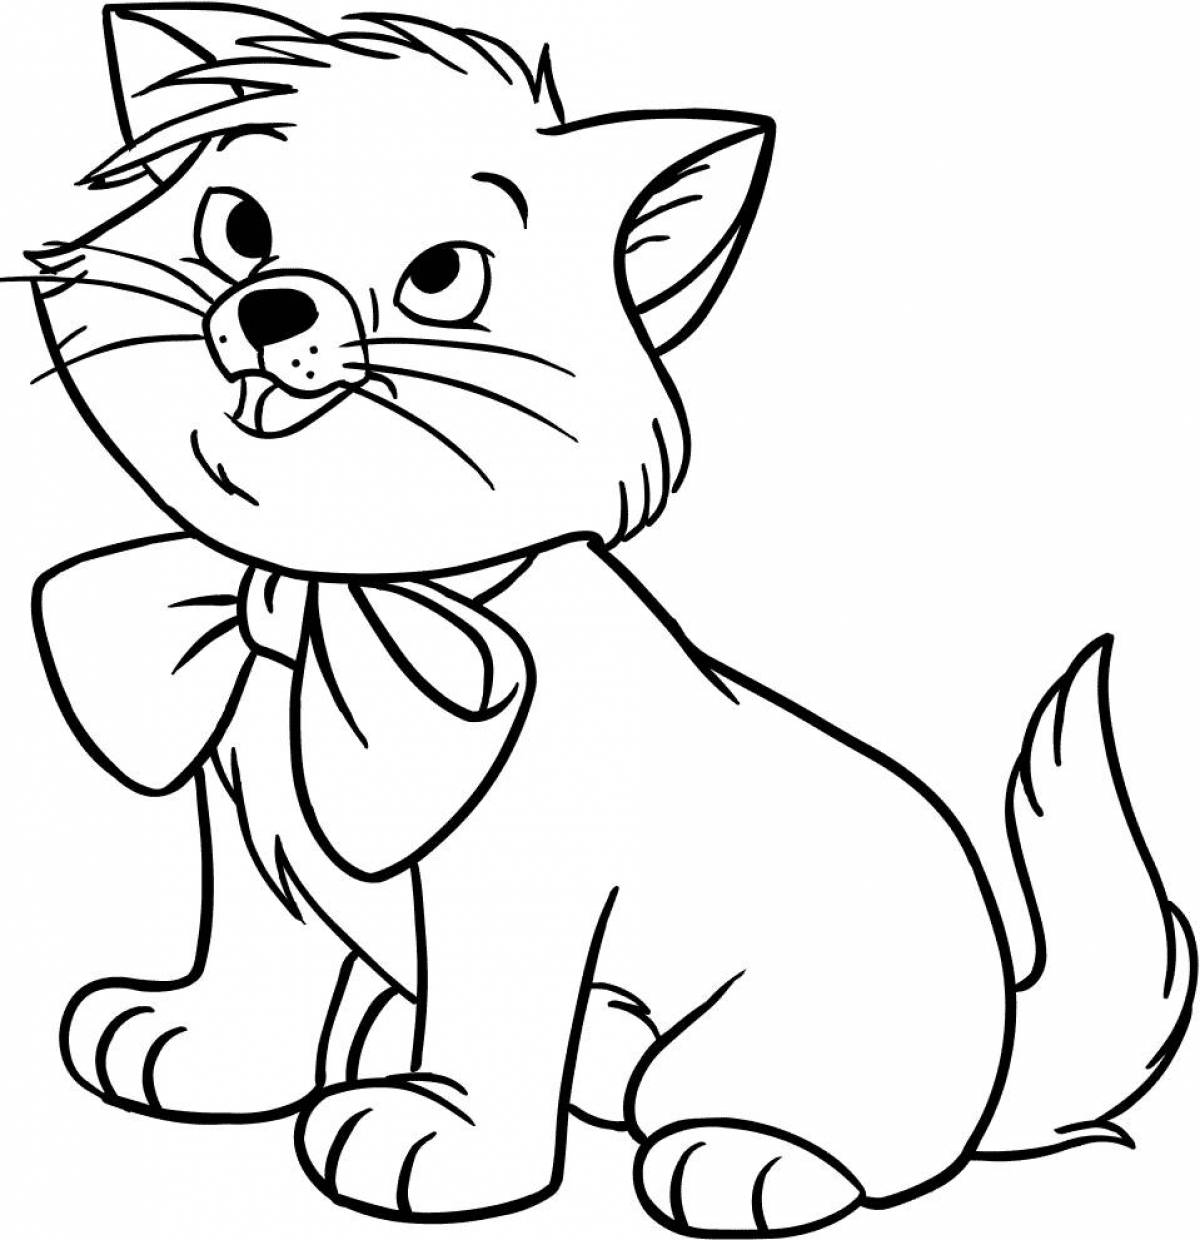 Energetic cats coloring pages for kids